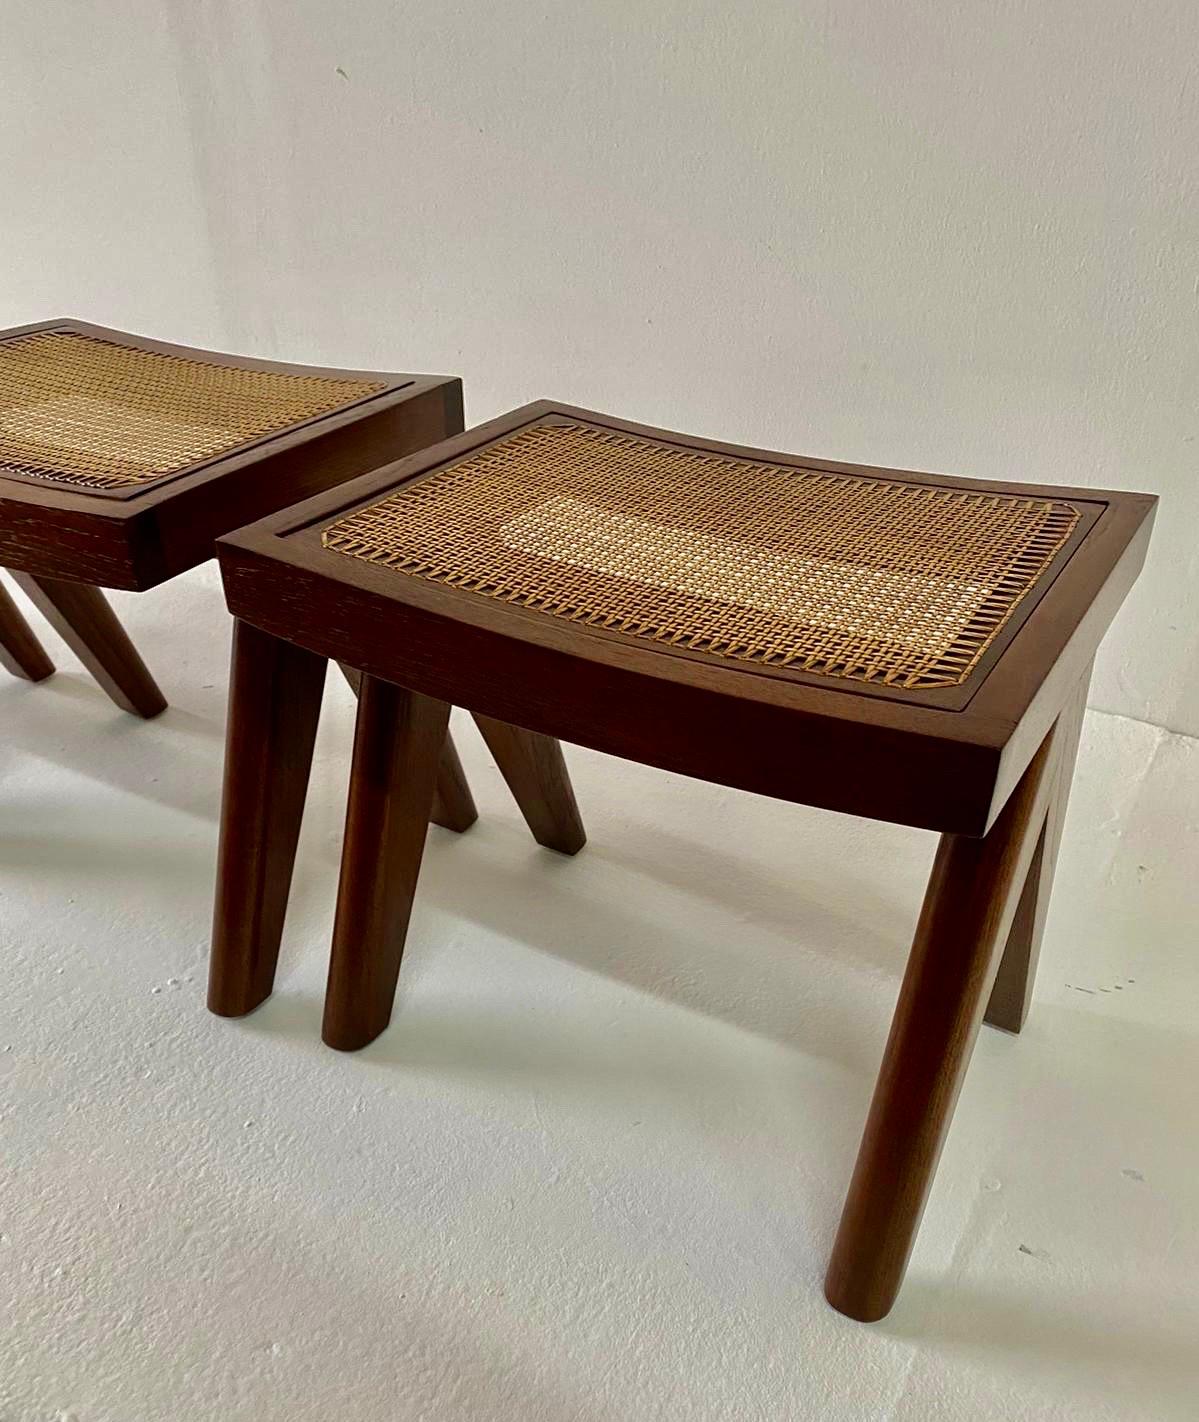 Well hand crafted solid teak wood, very well proportioned single stools.  Total of 4 avilable, Sold in Pairs only.  Beautiful water resistant cane seat.  THIS ITEM IS LOCATED AND WILL SHIP FROM OUR MIAMI, FLORIDA SHOWROOM.